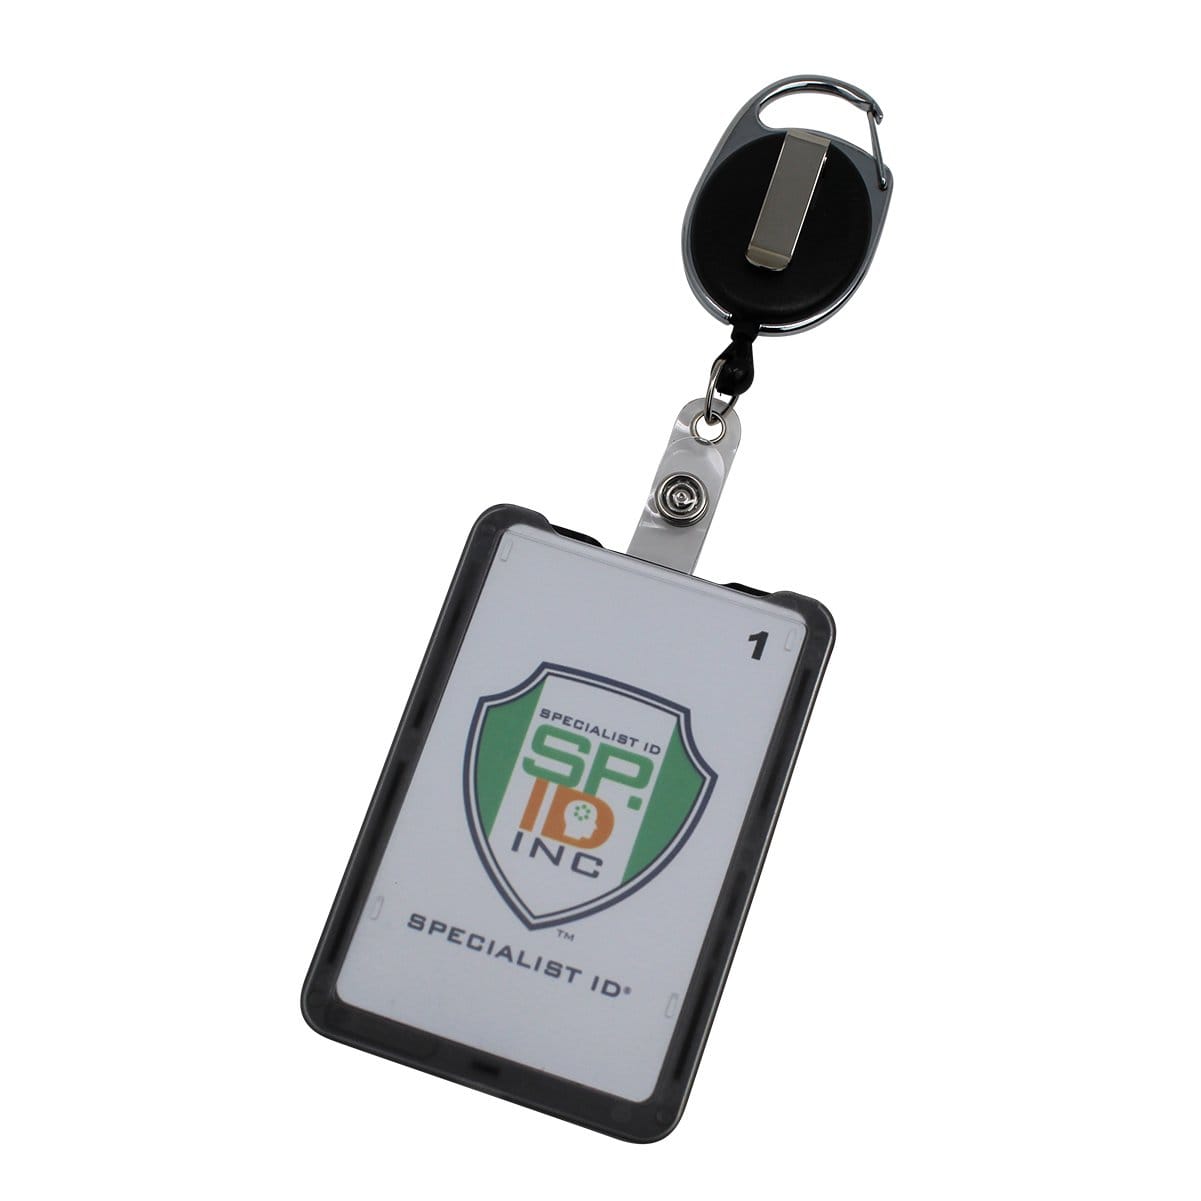 Specialist ID Hard Plastic 3 Card Badge Holder with Retractable Reel - Retracting ID Lanyard Features Belt Clip & Carabiner - Rigid Vertical CAC Hold